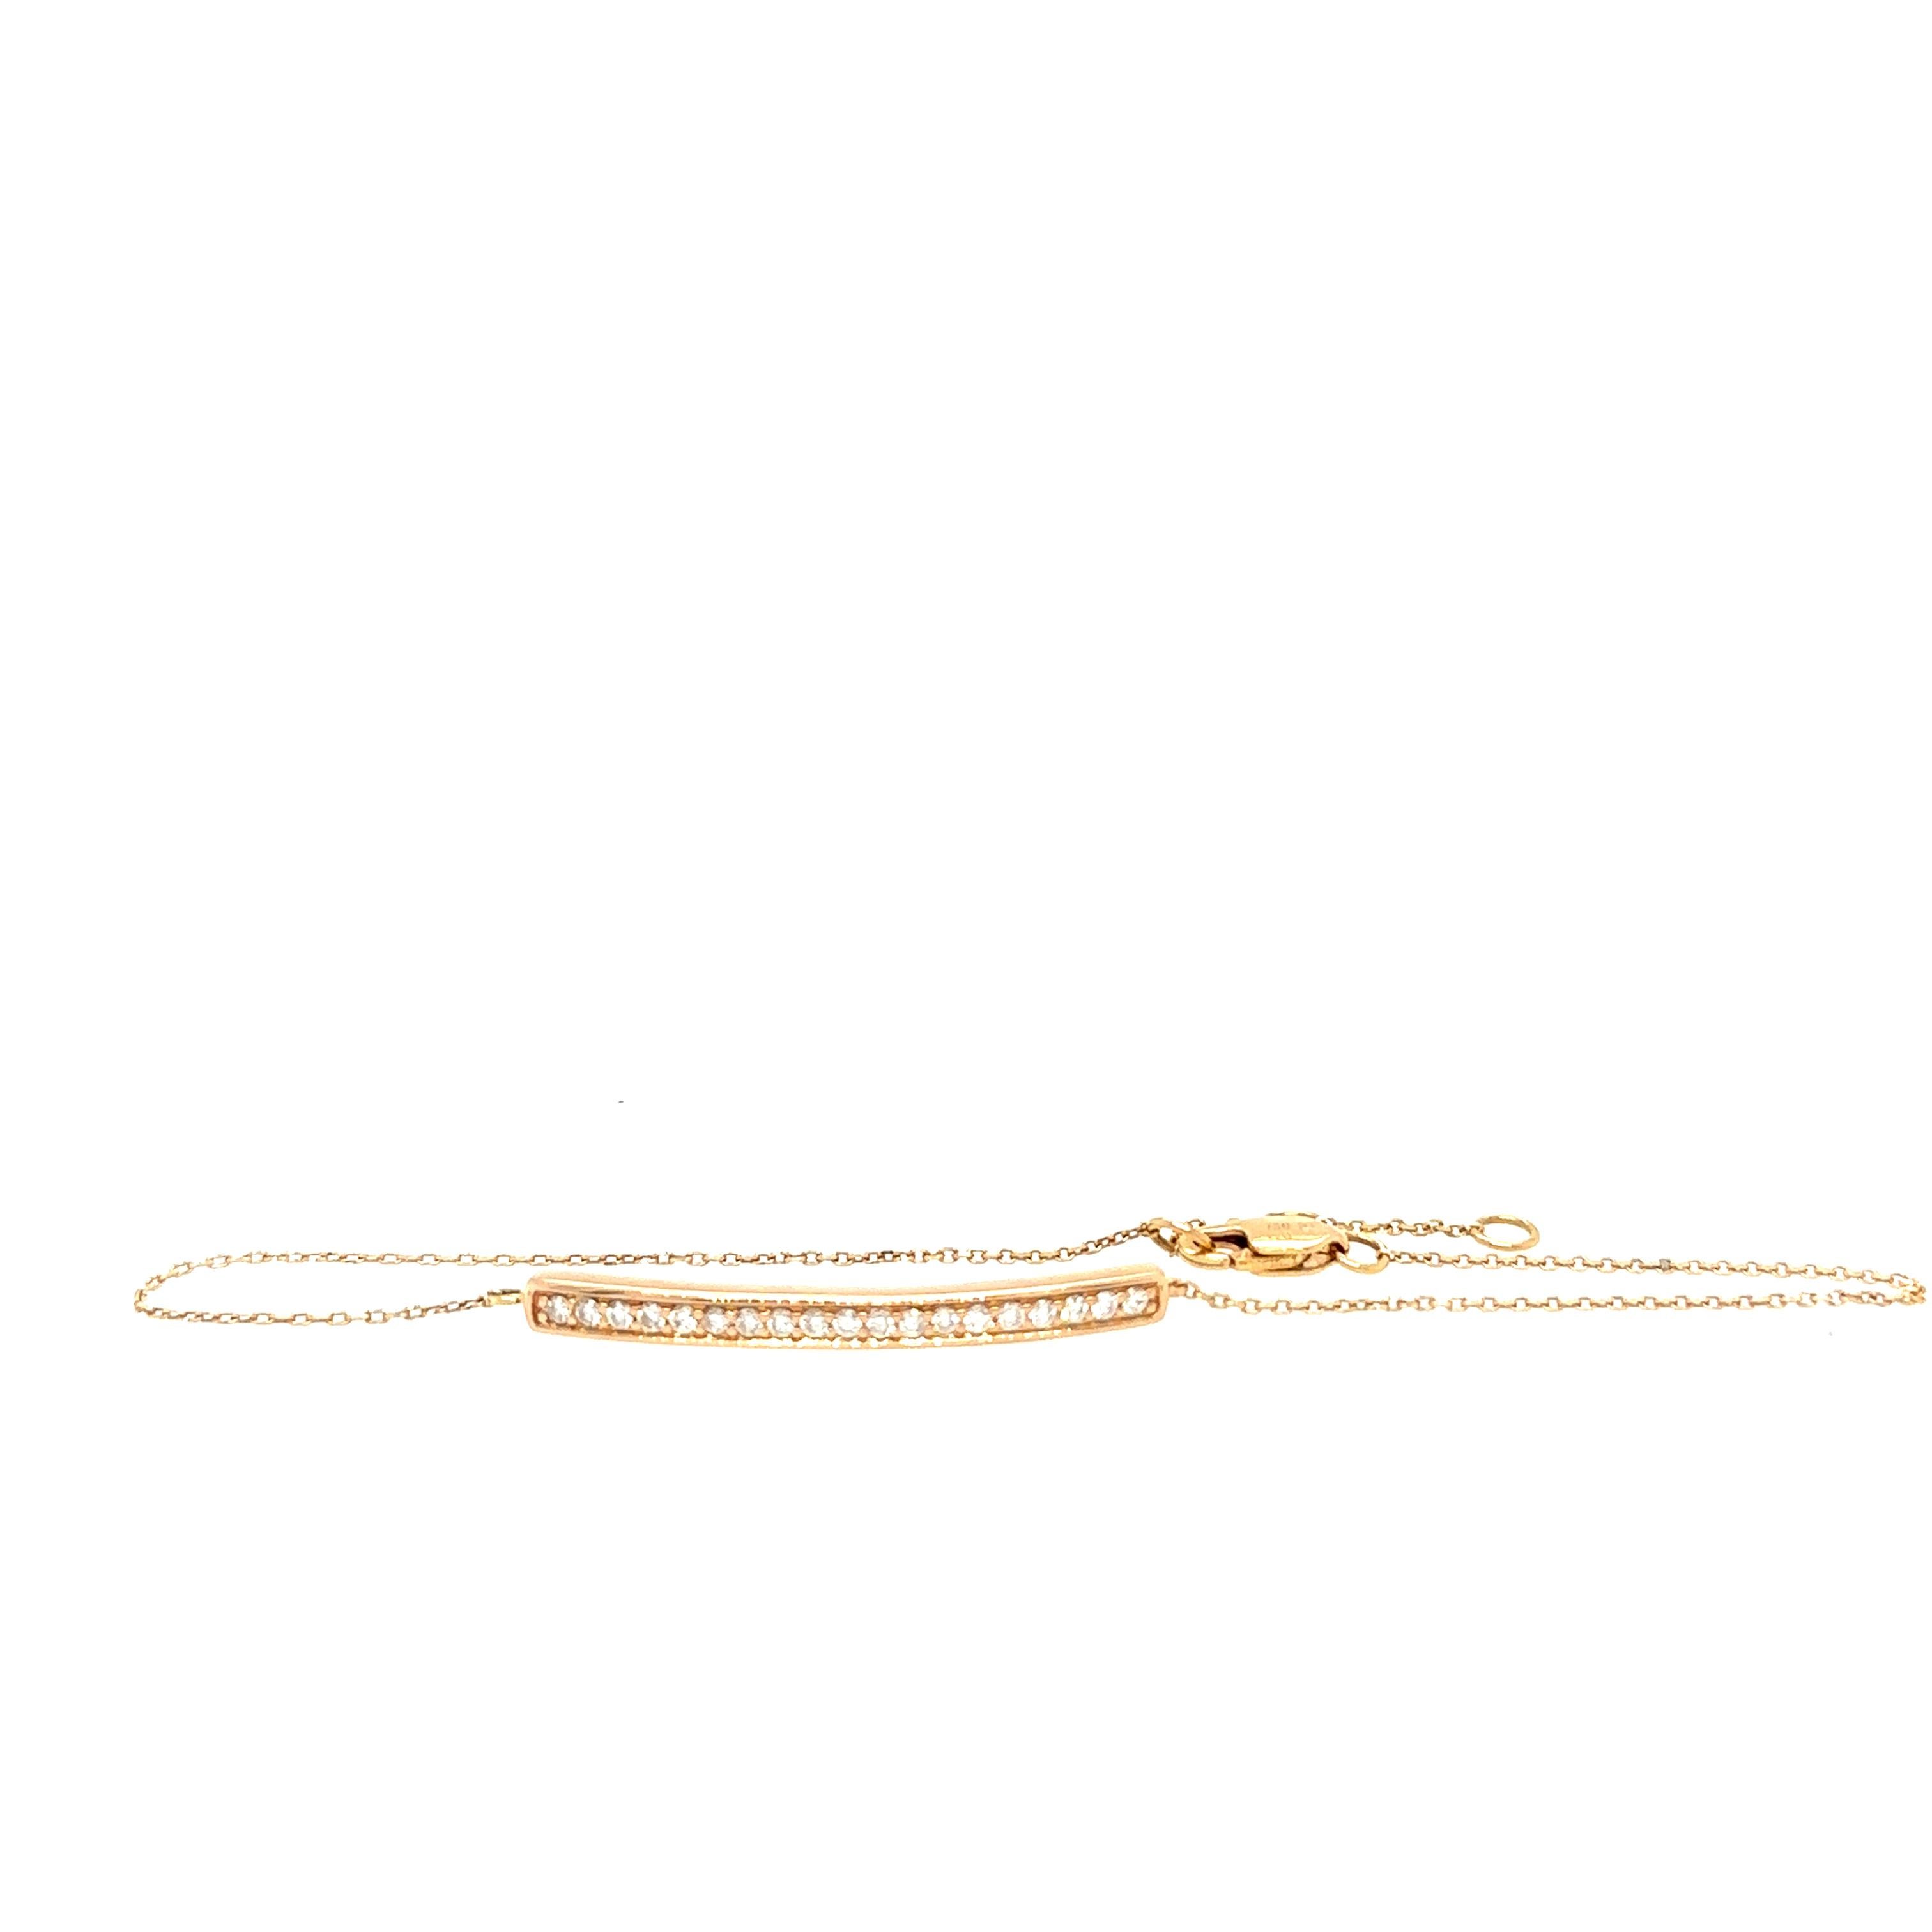 Unique features:

Midas 18ct Rose Gold Chain 0.23ct with 21 round brilliant cut diamonds.

Metal: 18ct Rose Gold
Carat: 0.23ct
Colour: N/A
Clarity: N/A
Cut: Round Brilliant Cut
Weight: 2.25 grams
Engravings/Markings: N/A

Size/Measurement: